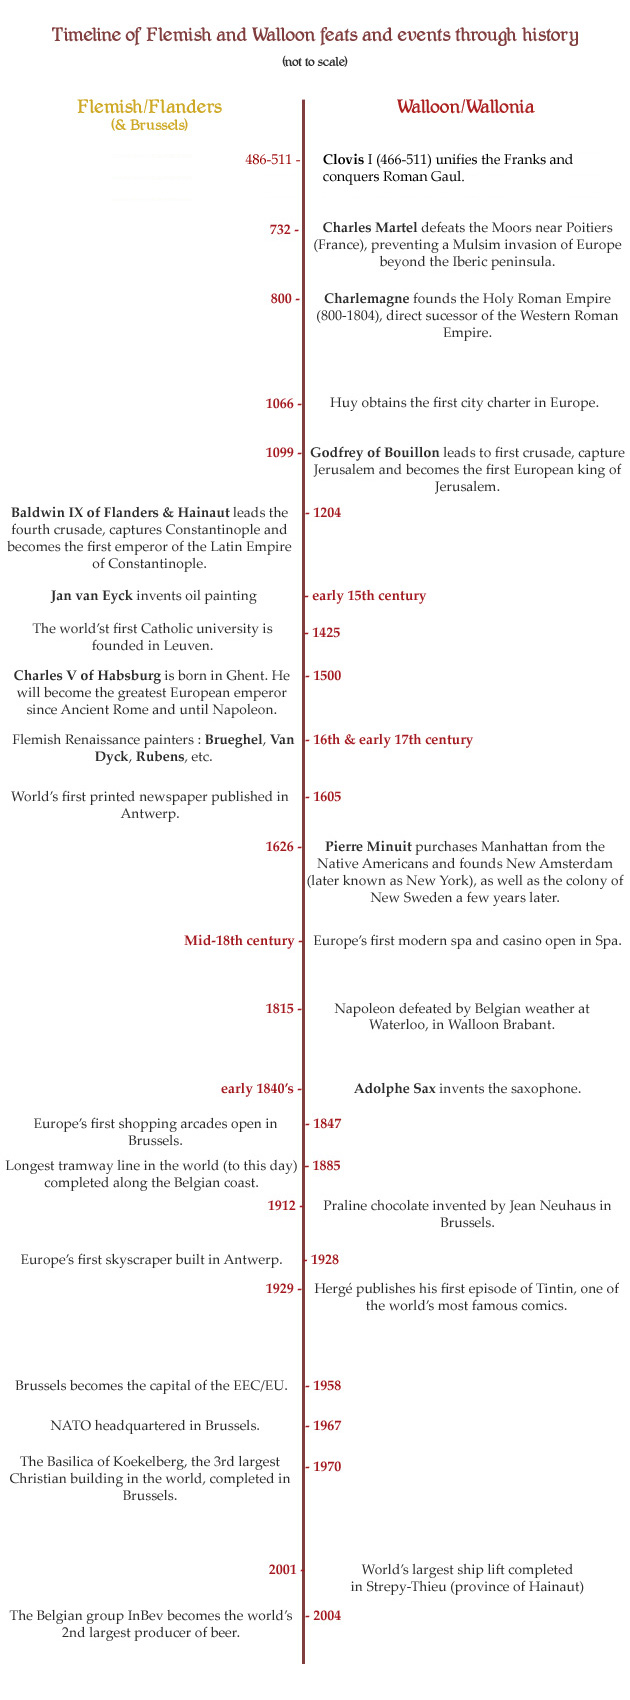 Timeline of Flemish and Walloon history